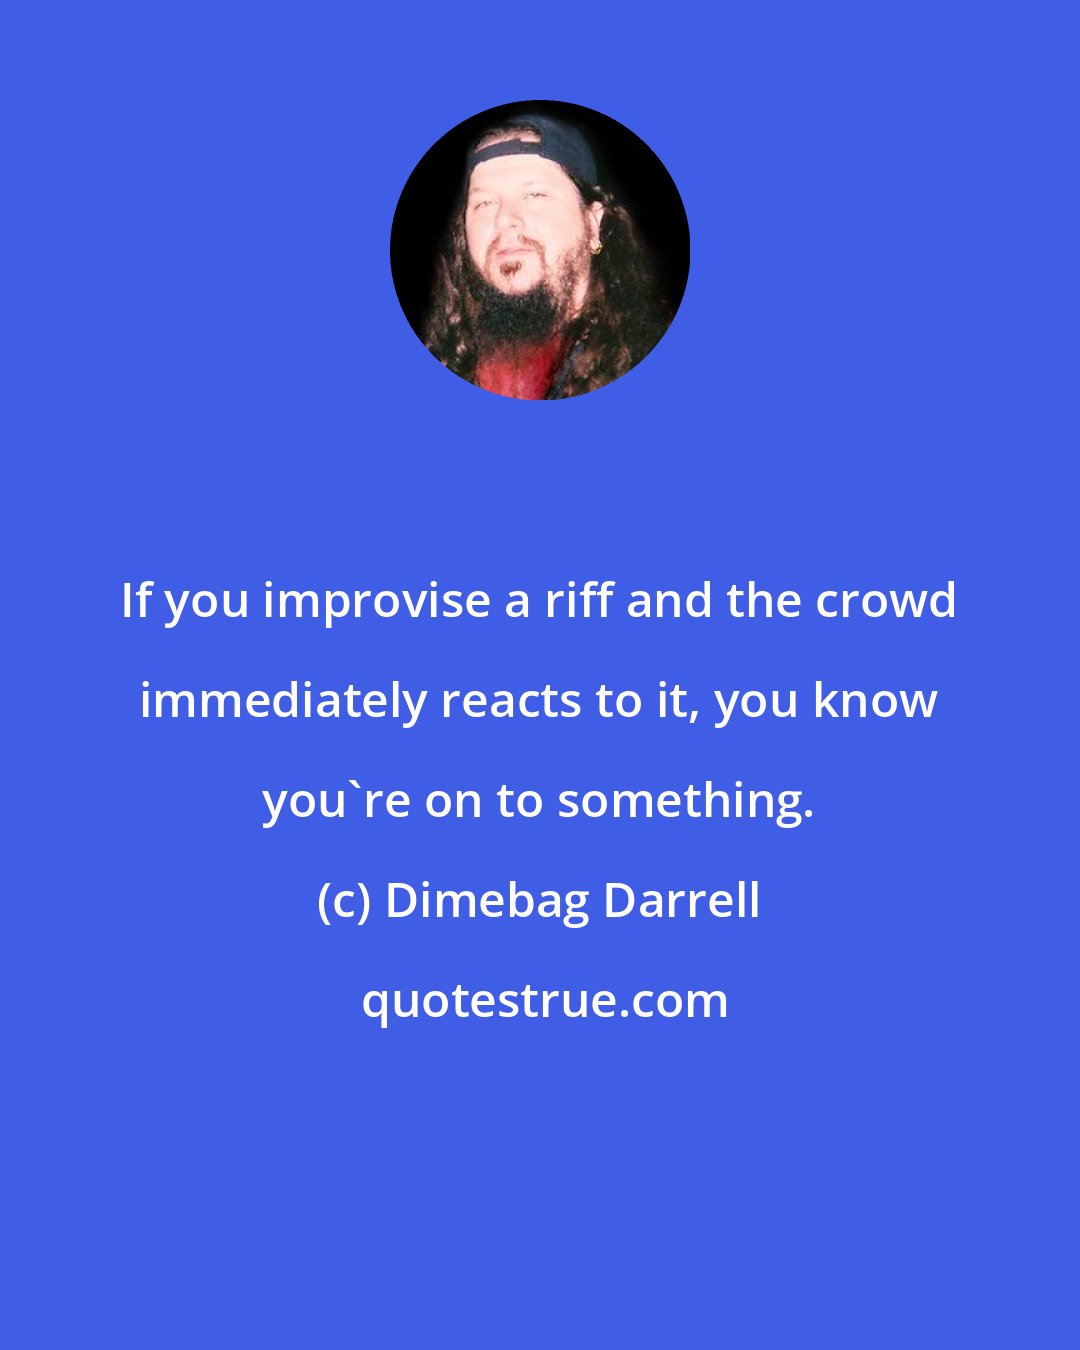 Dimebag Darrell: If you improvise a riff and the crowd immediately reacts to it, you know you're on to something.